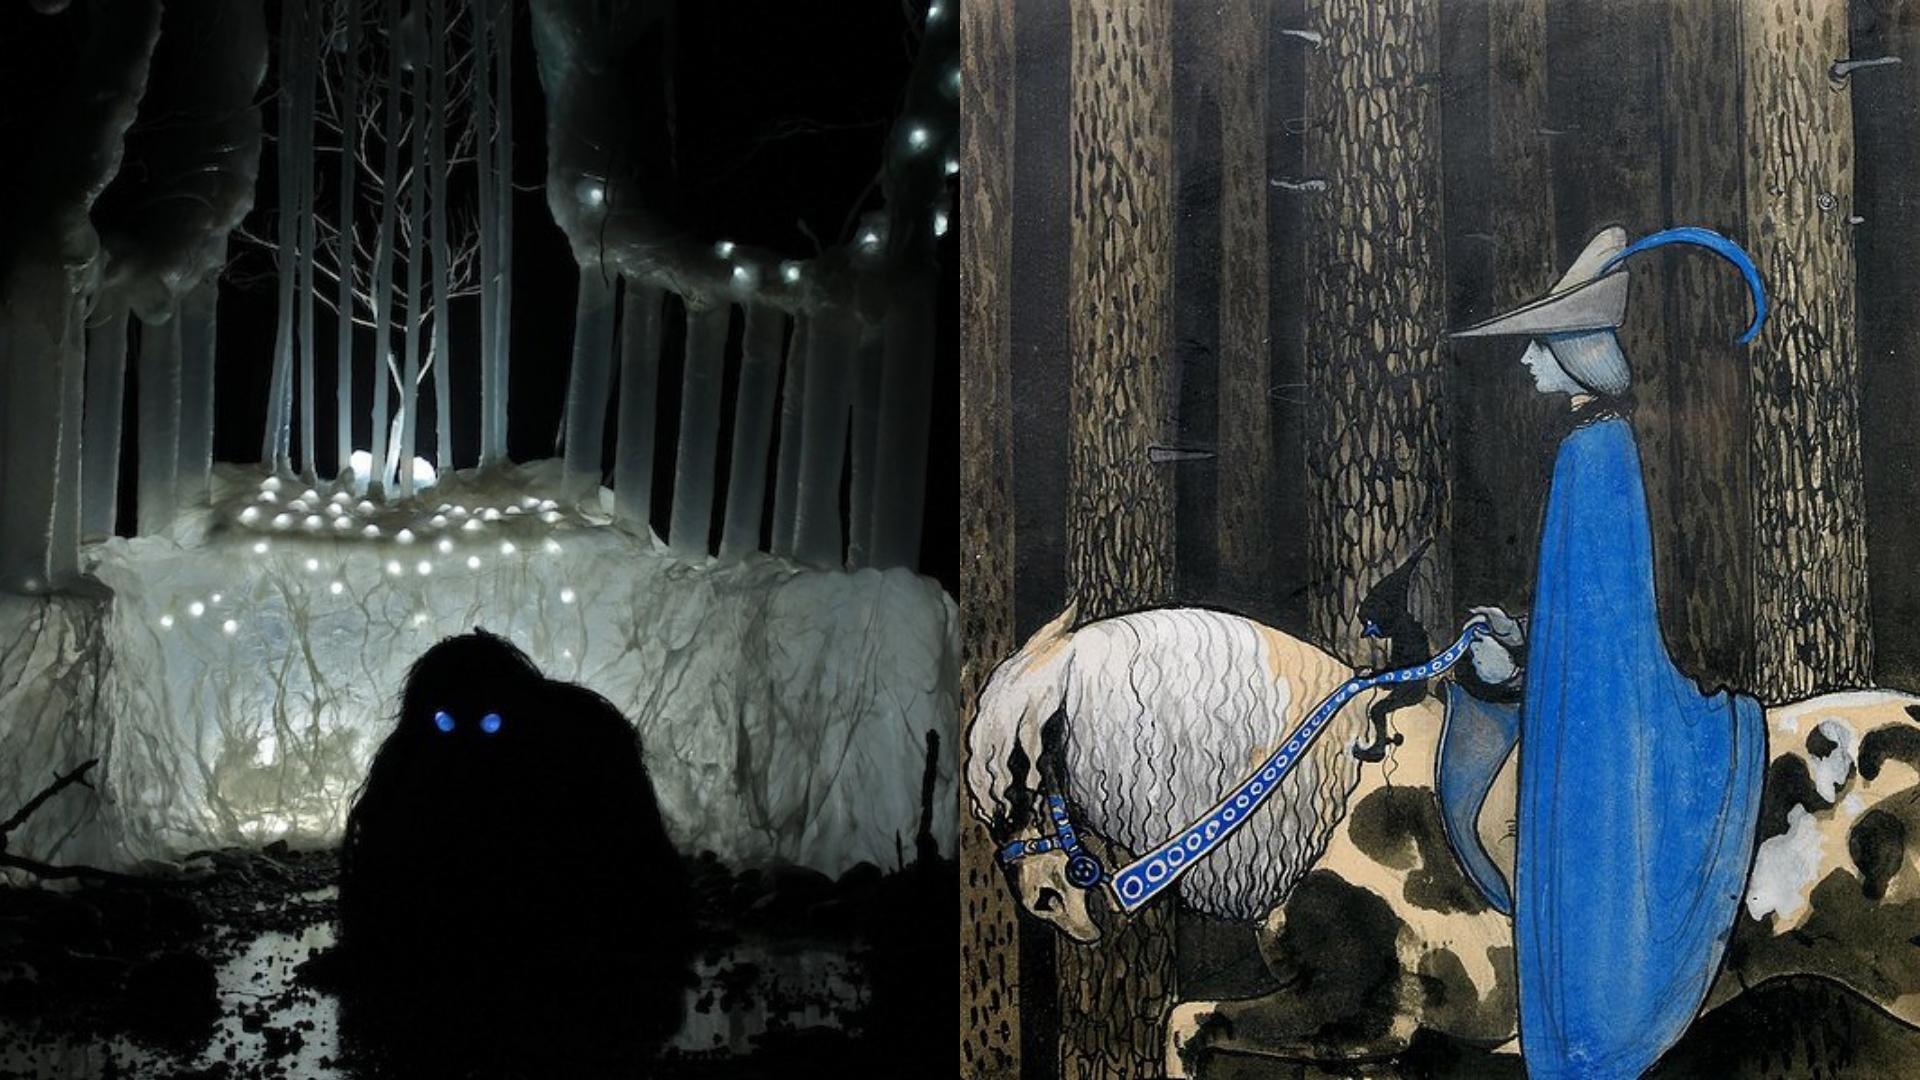 Digital image of a dark creature with blue eyes in the forest and a drawing of a rider with a blue cloak on a horse.